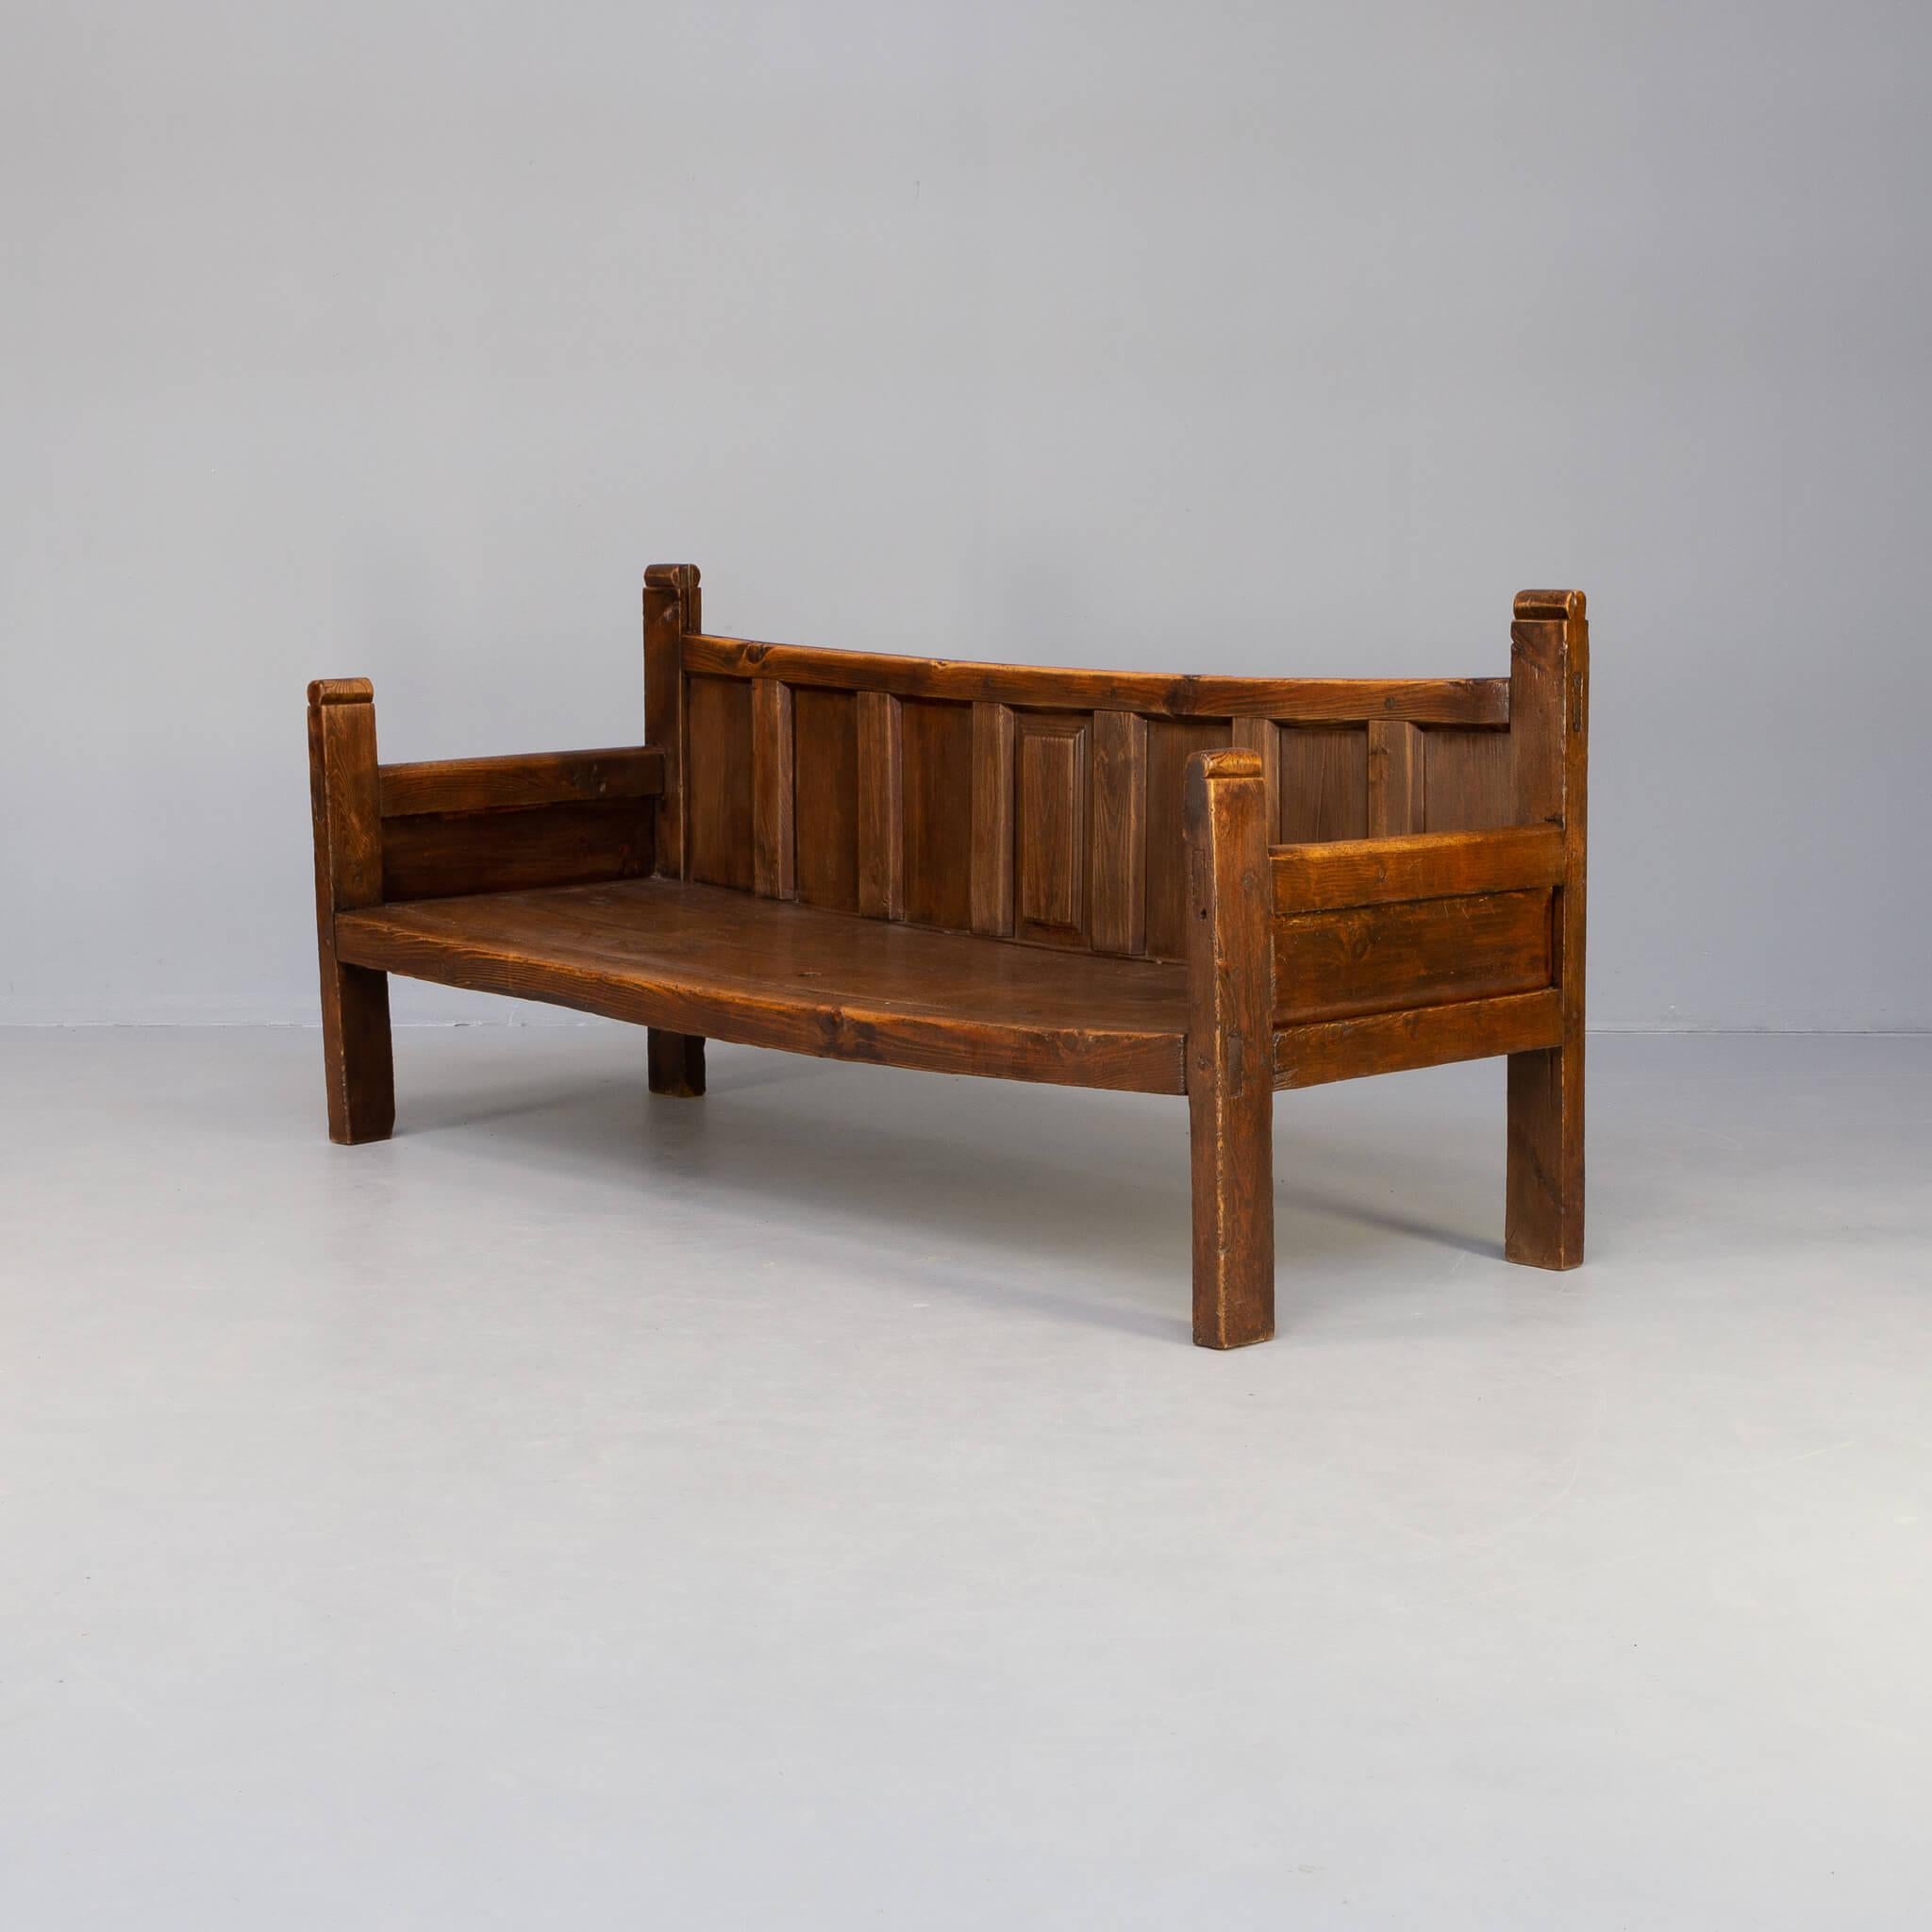 Spanish 19th Century Rustic Oak Wooden Bench For Sale